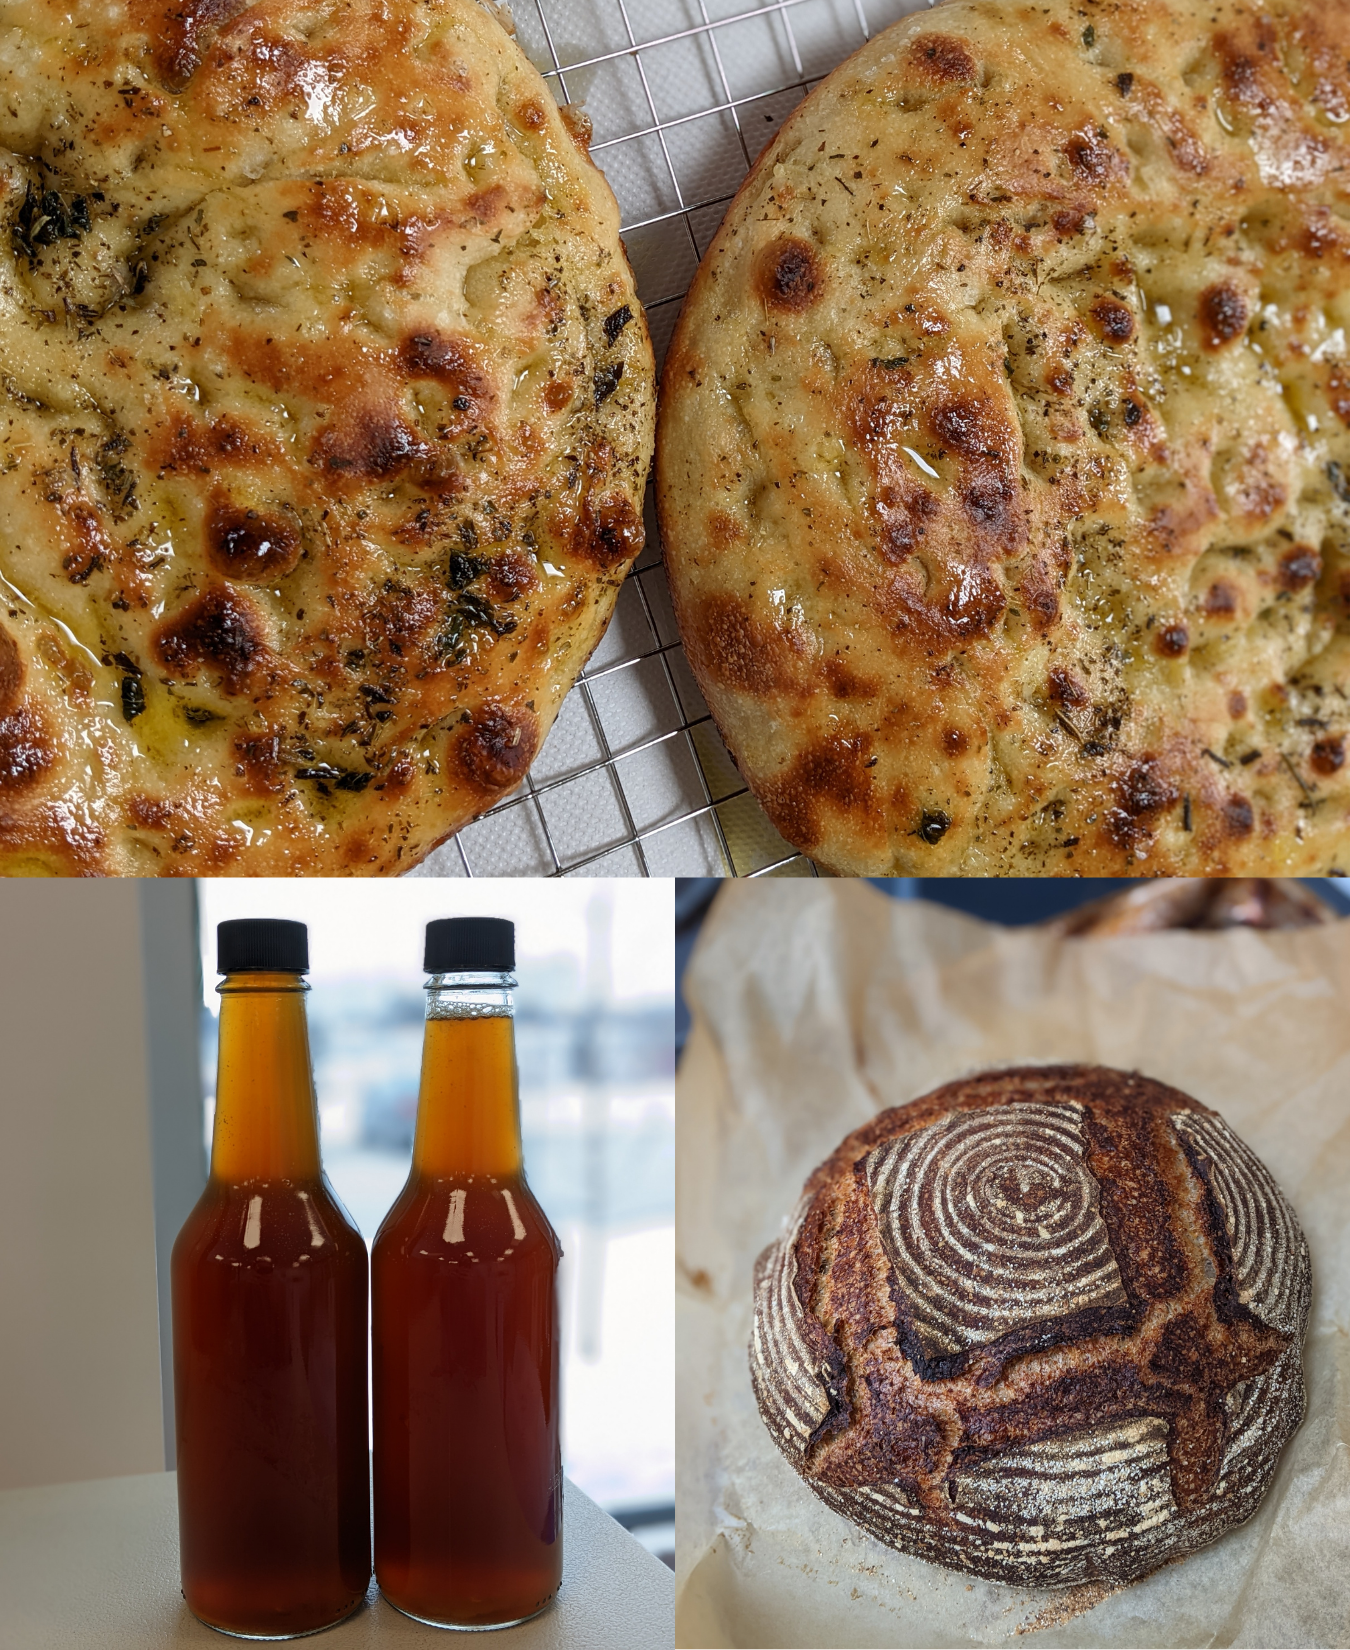 baked breads and soya sauce products